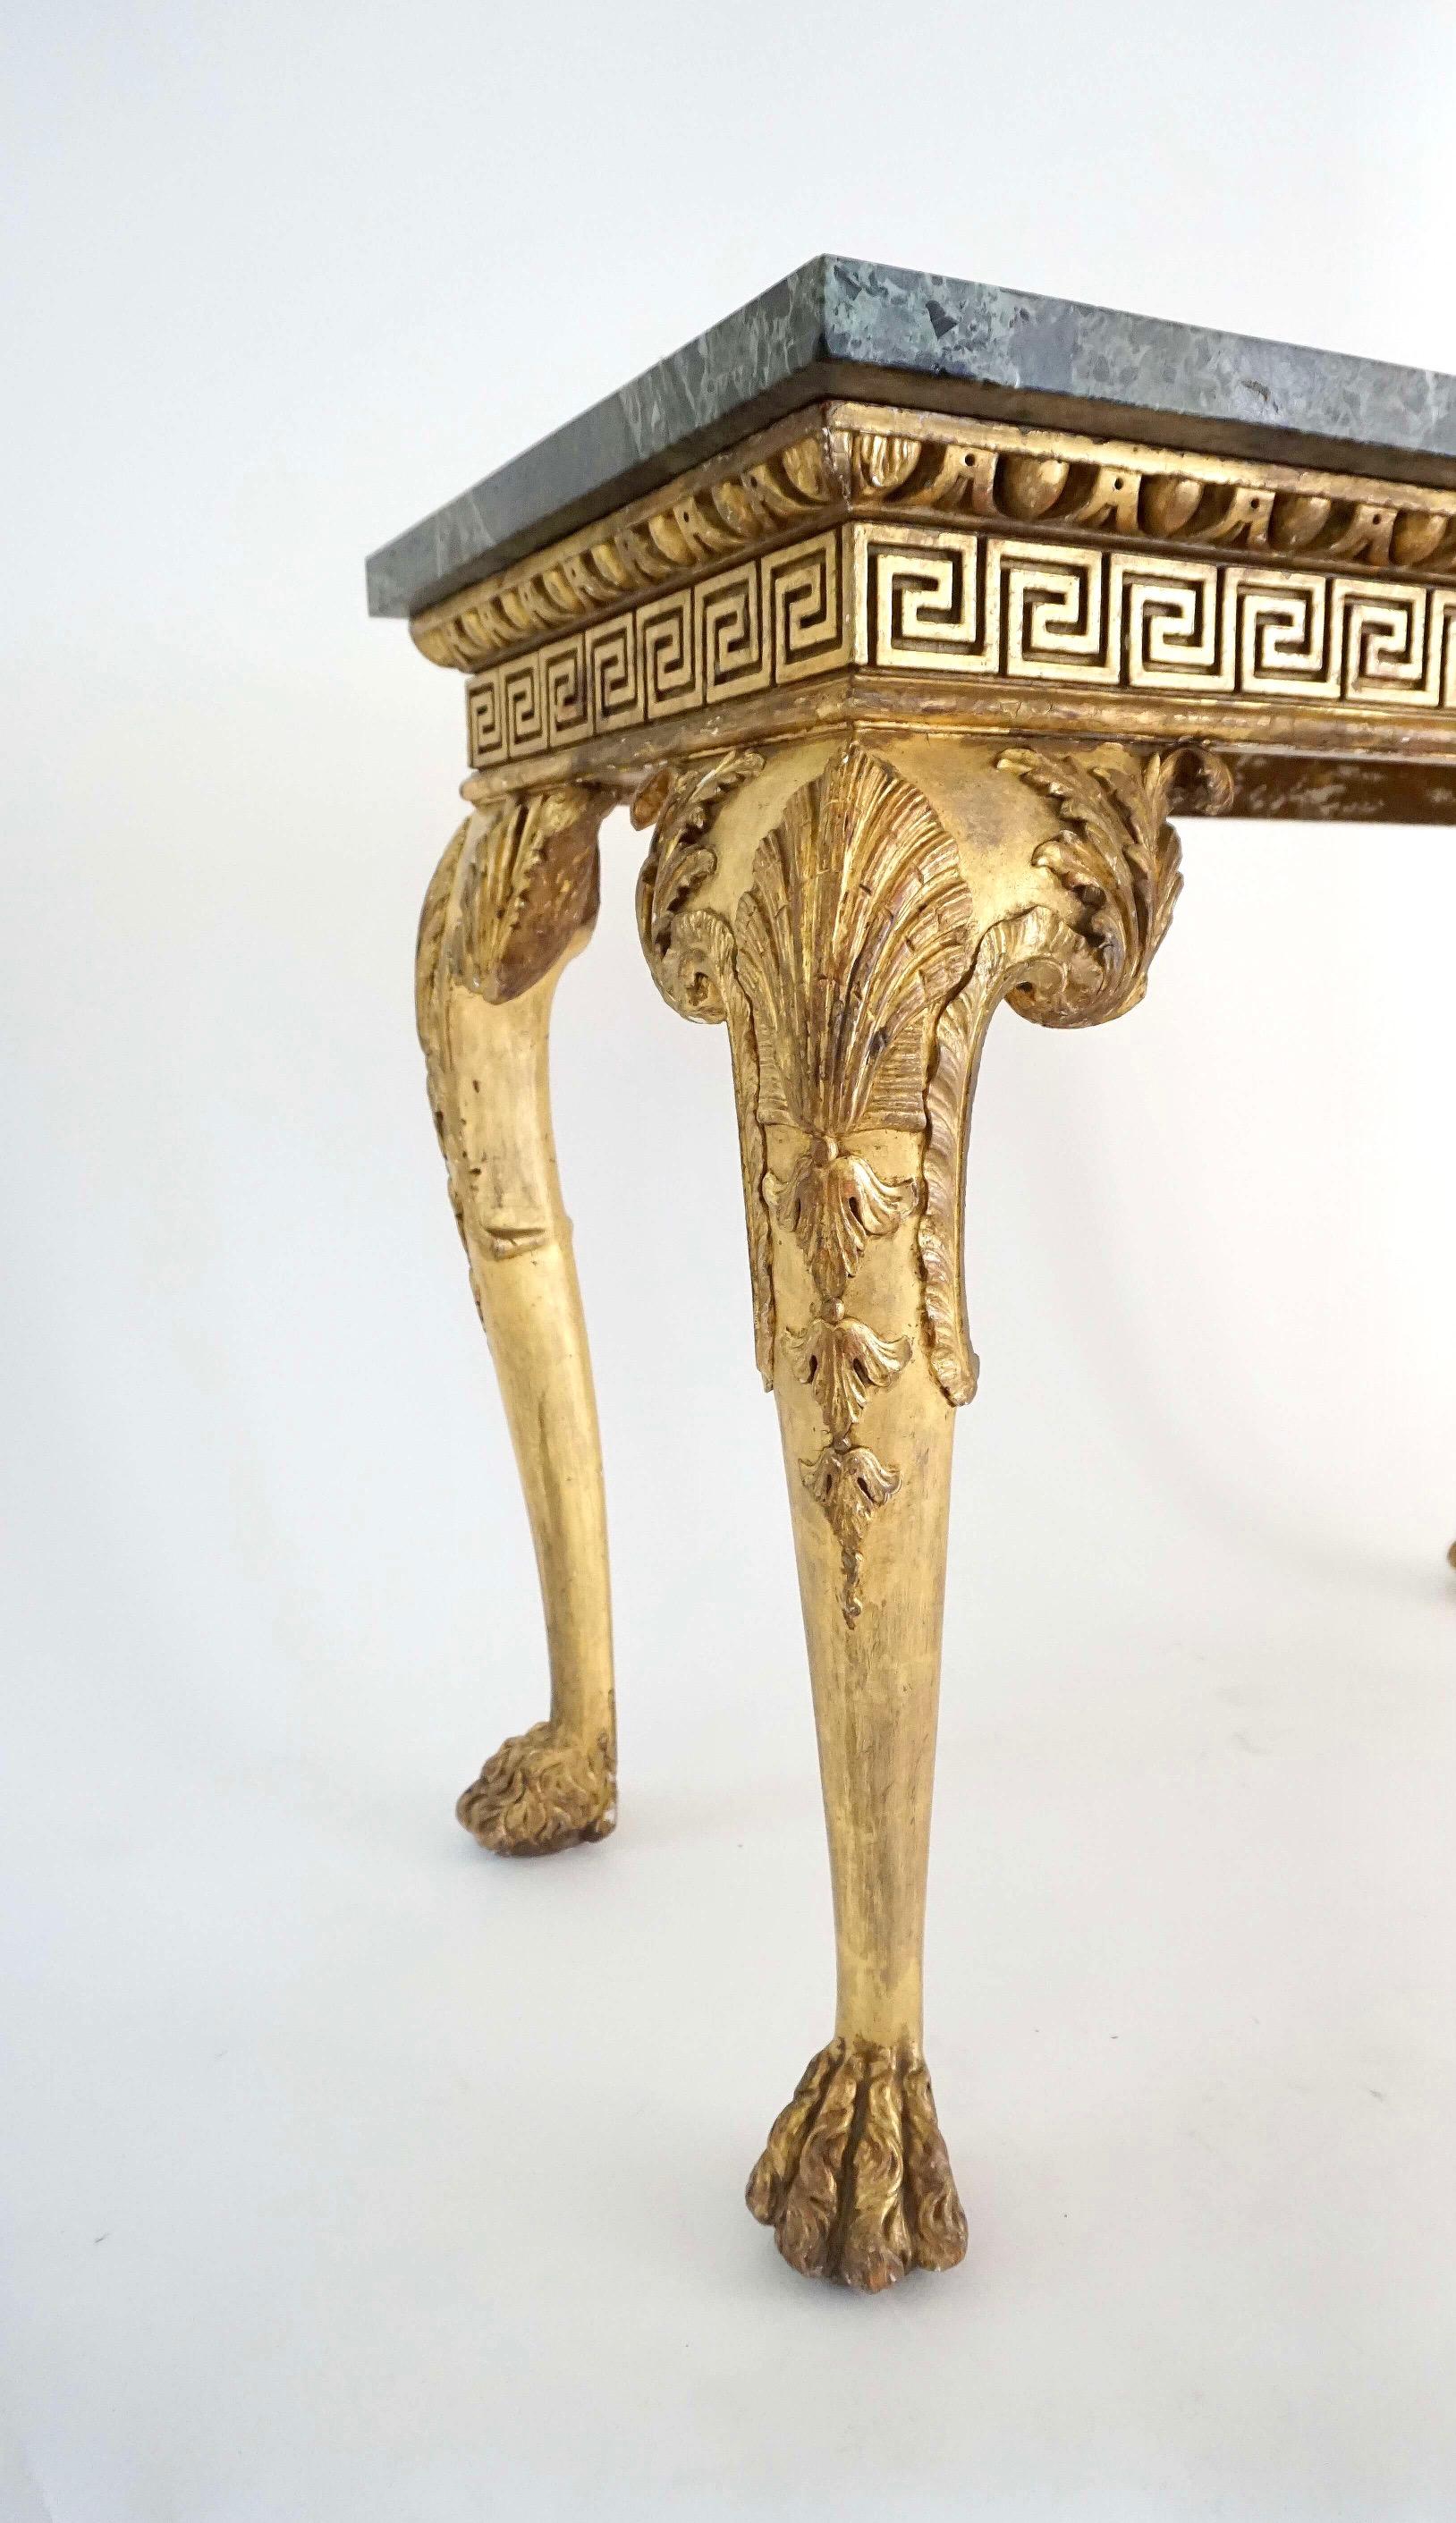 Hand-Carved Anglo-Irish Regency Giltwood Side Tables, Manner of William Kent, circa 1815 For Sale